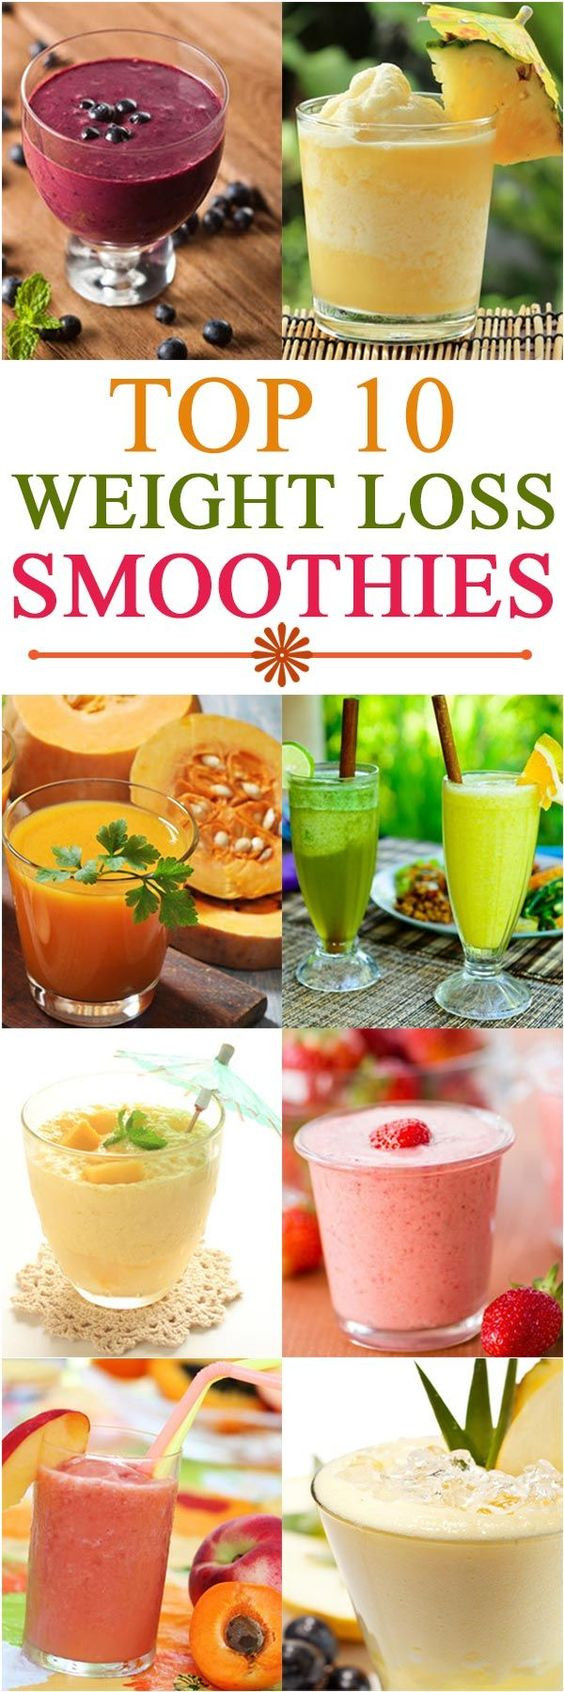 Fruit Smoothies For Weight Loss
 Gezondheid Smoothies and Smoothie on Pinterest